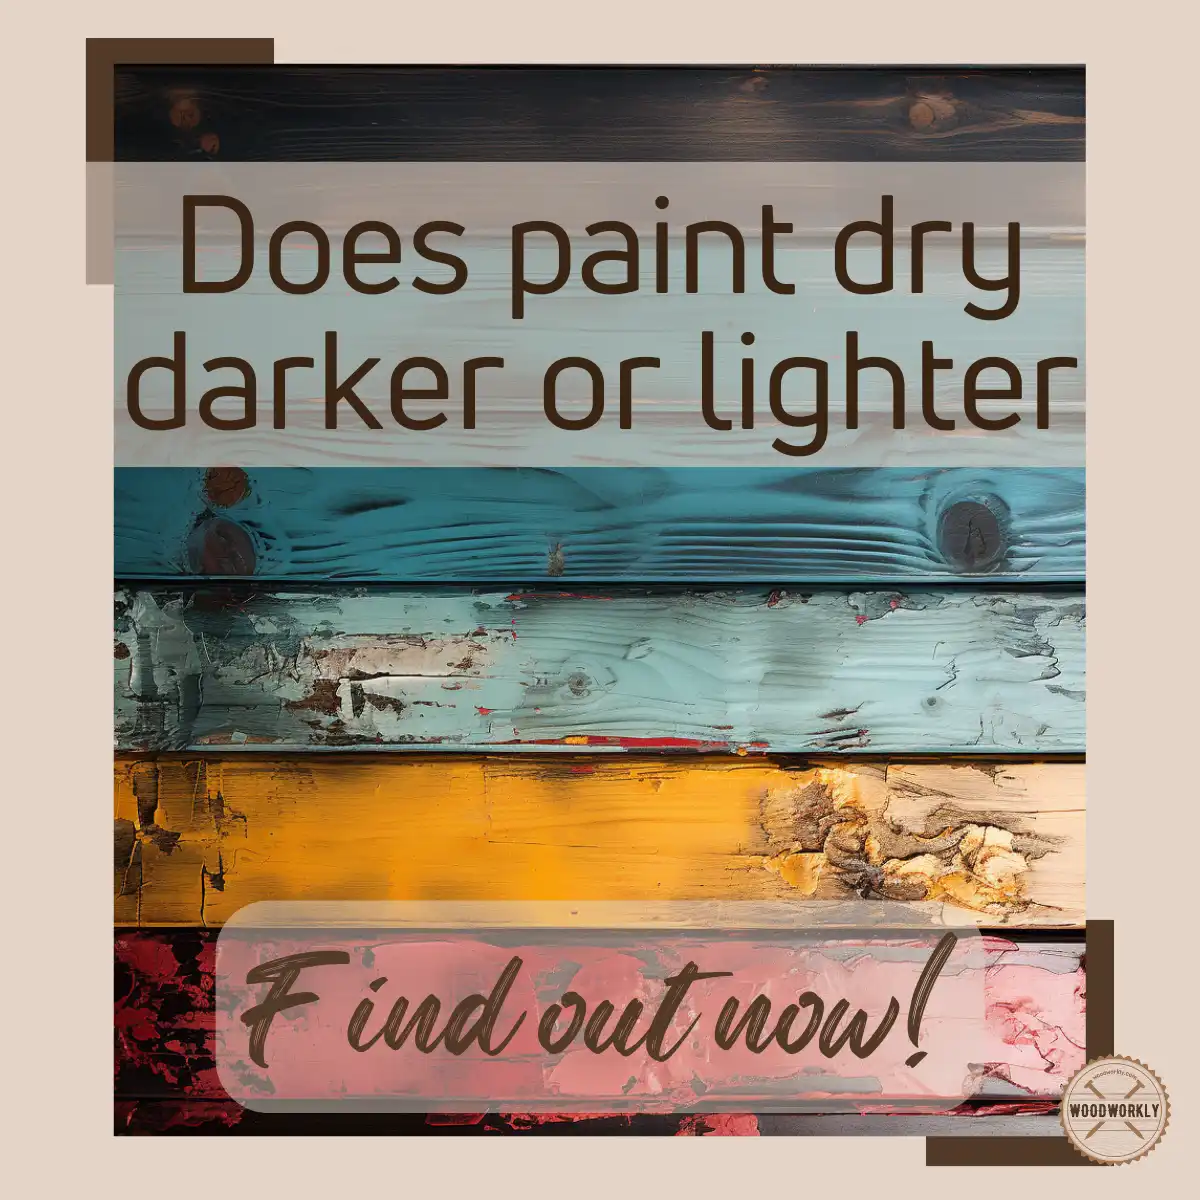 Does paint dry darker or lighter